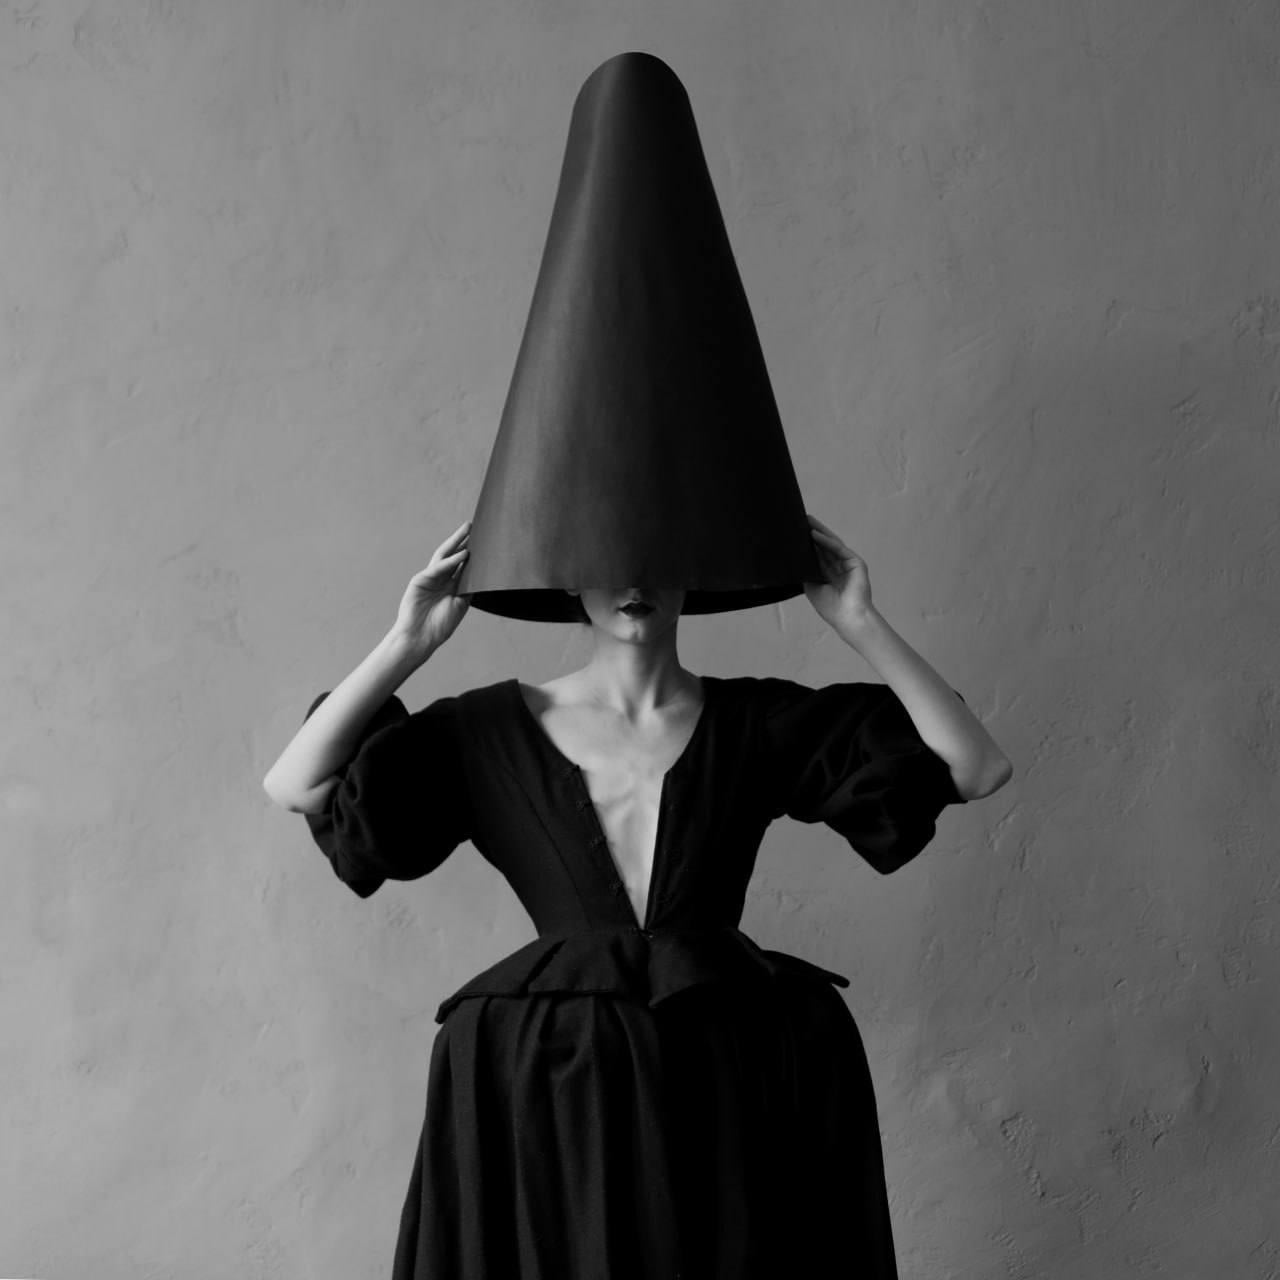 "Invisibility Hat" Photography 31" x 31" in Edition of 7 by Olha Stepanian

Printed on Epson Professional Paper
Signed and numbered by the artist 

Not framed. Ships in a tube. 

Available sizes:			
Edition of 24			16" x 16" inch
Edition of 15			24"